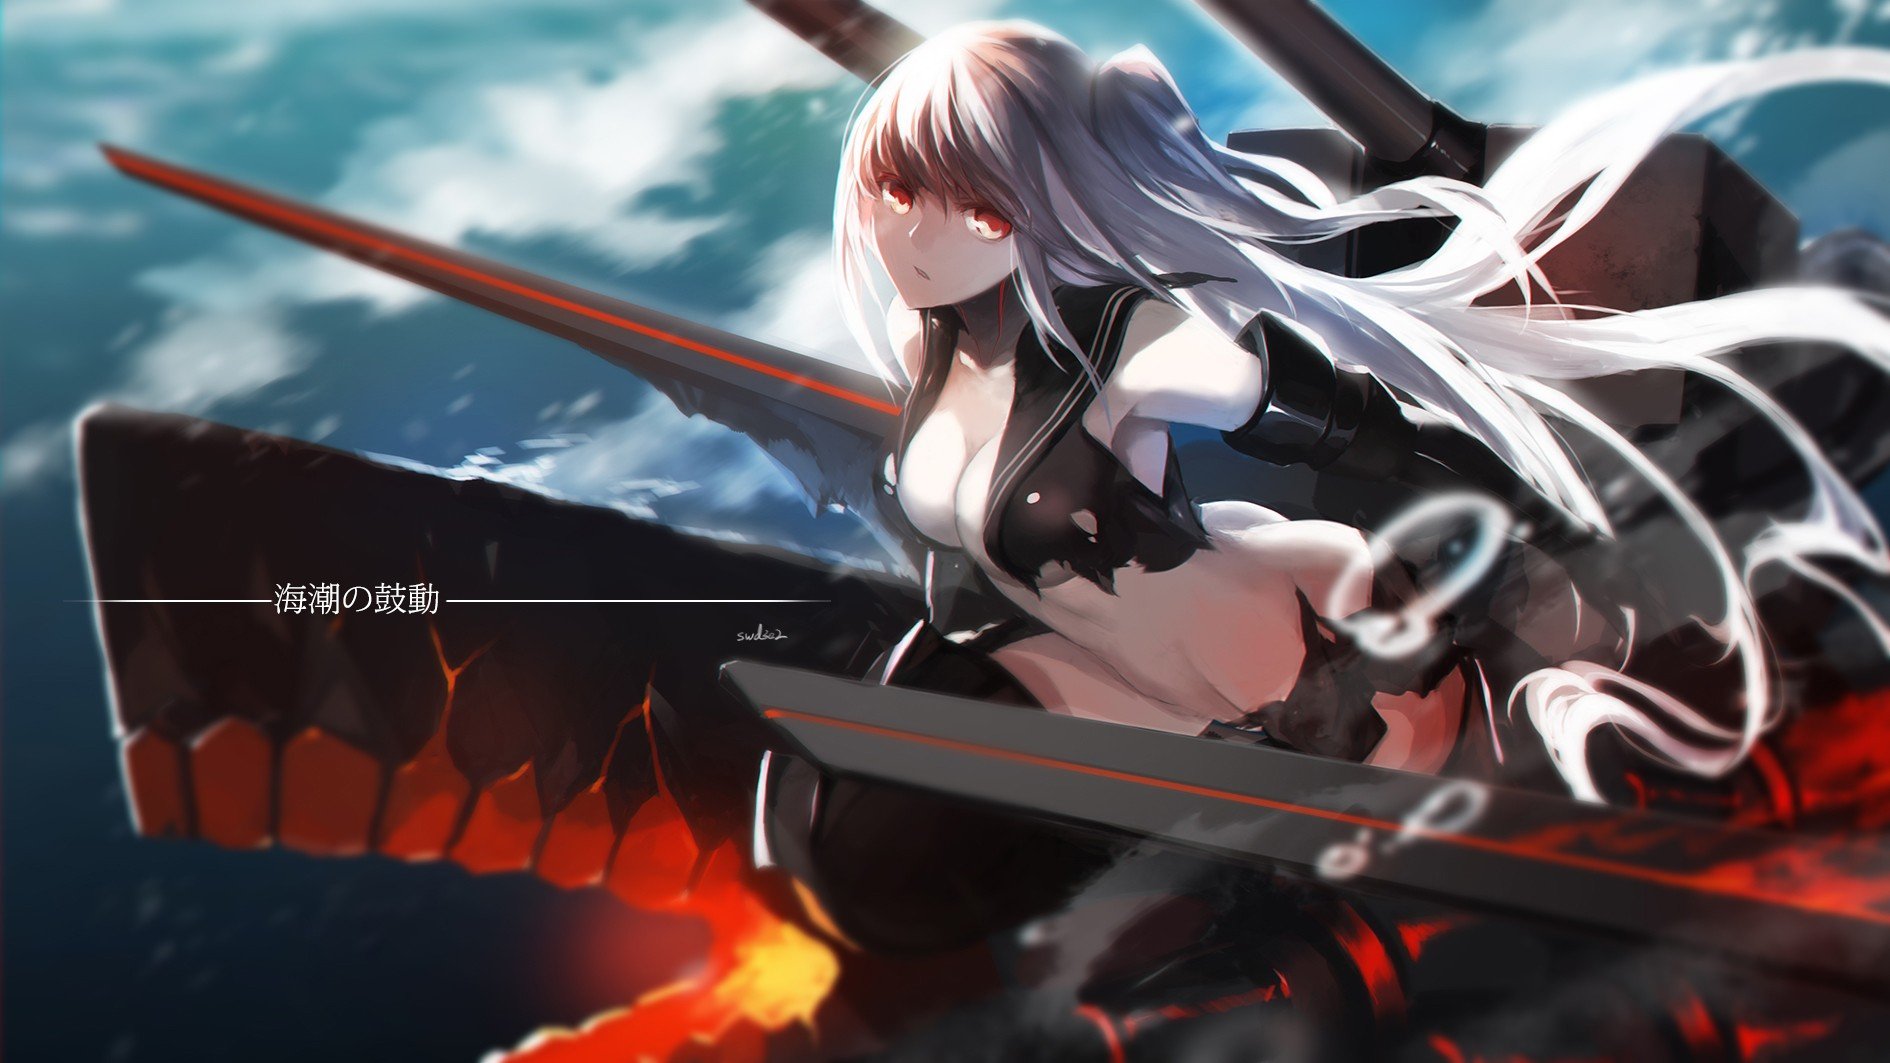 Kantai Collection, Aircraft Carrier Hime, Swd3e2, Torn clothes, Sky, Clouds, Long hair, Anime girls, Anime, Red eyes Wallpaper